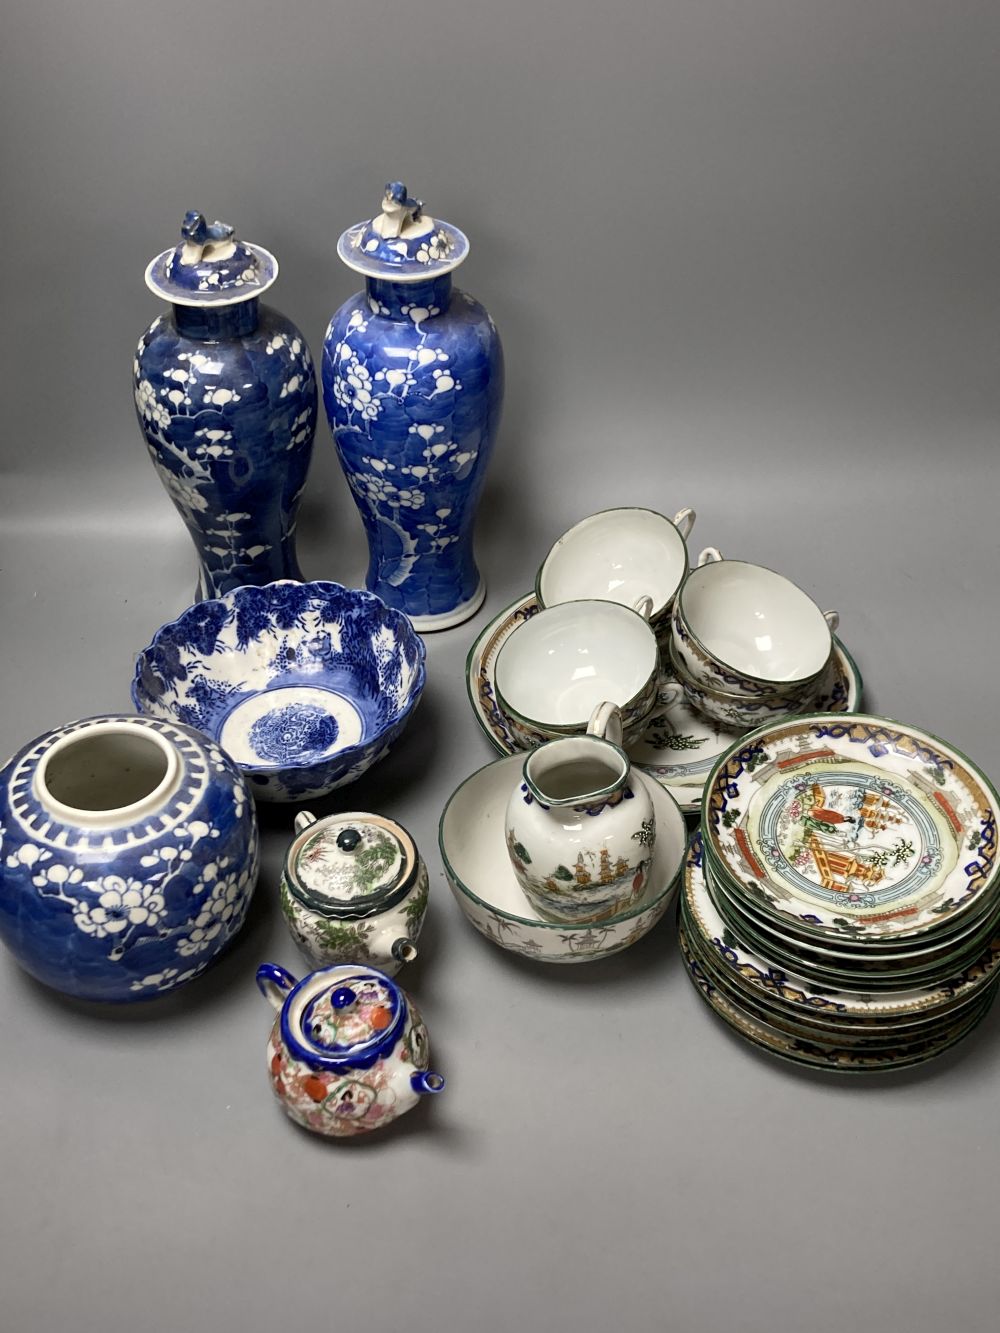 Two Chinese blue and white baluster jars and covers, a ginger jar, a bowl, etc., all early 20th century